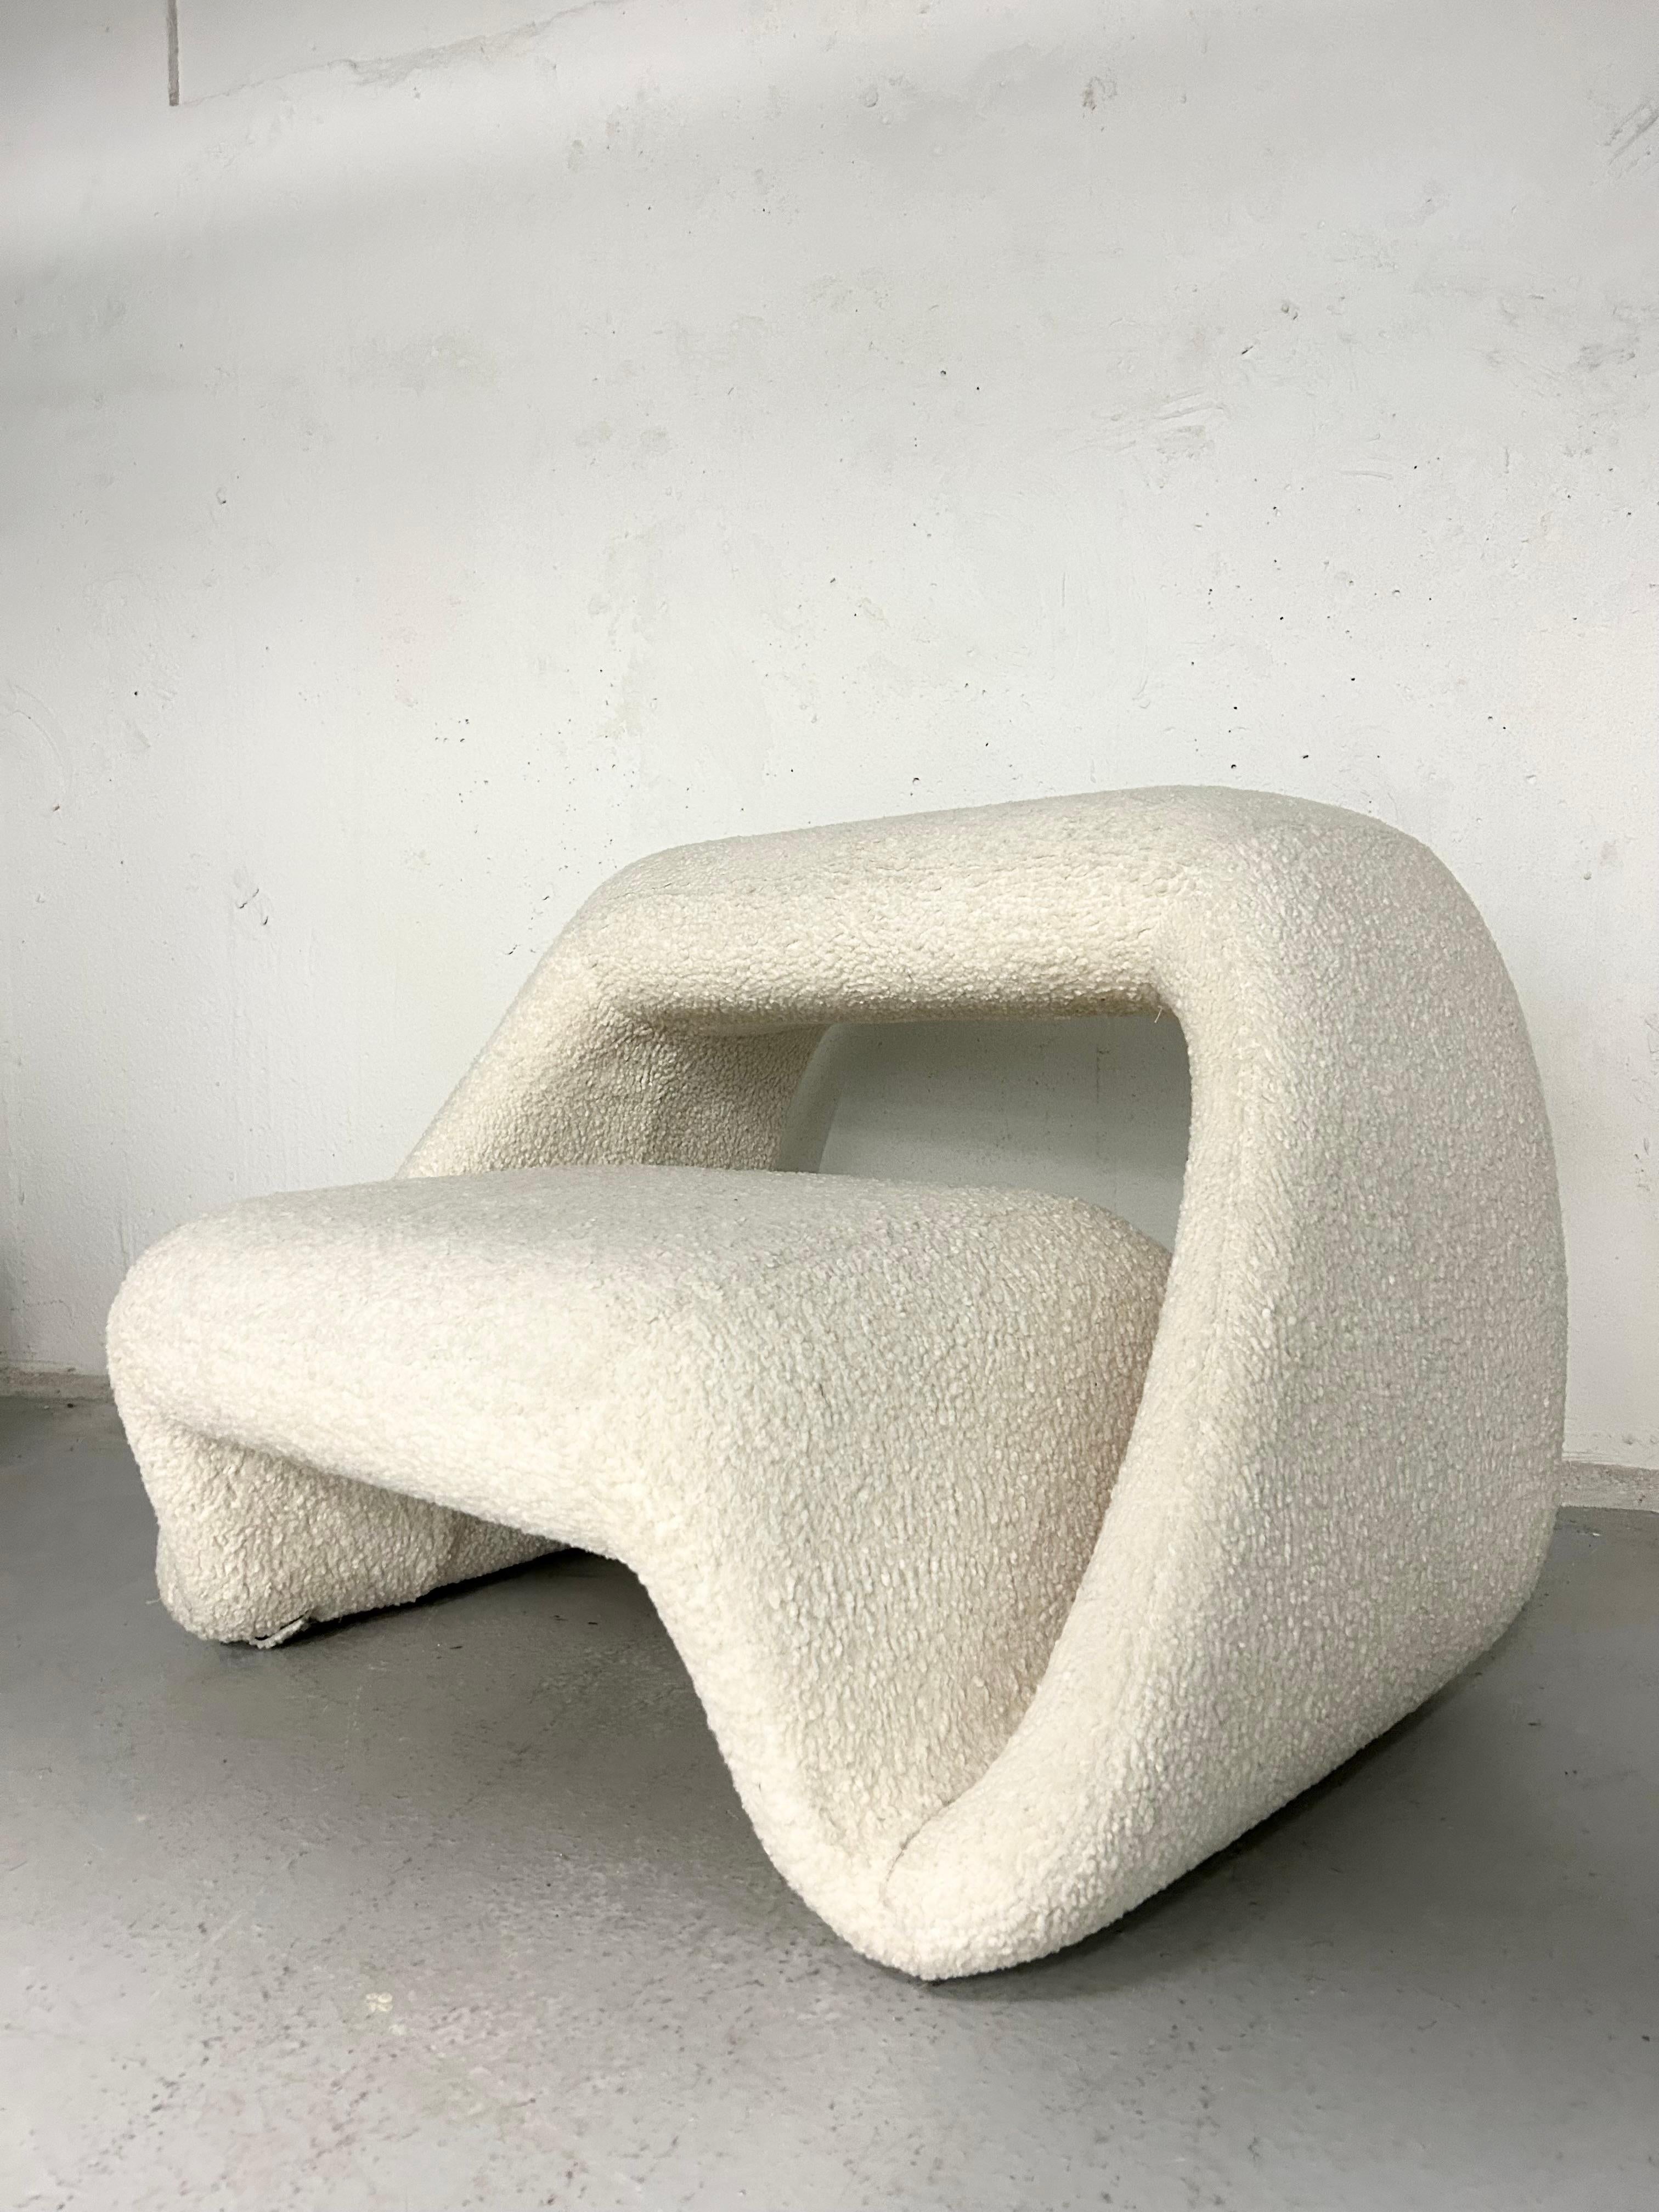 Air lounge collection was designed in 2006 by Fabio Novembre for Meritalia. Reupholstered in off white boucle. Upholstery is in amazing condition with minimal wear. 